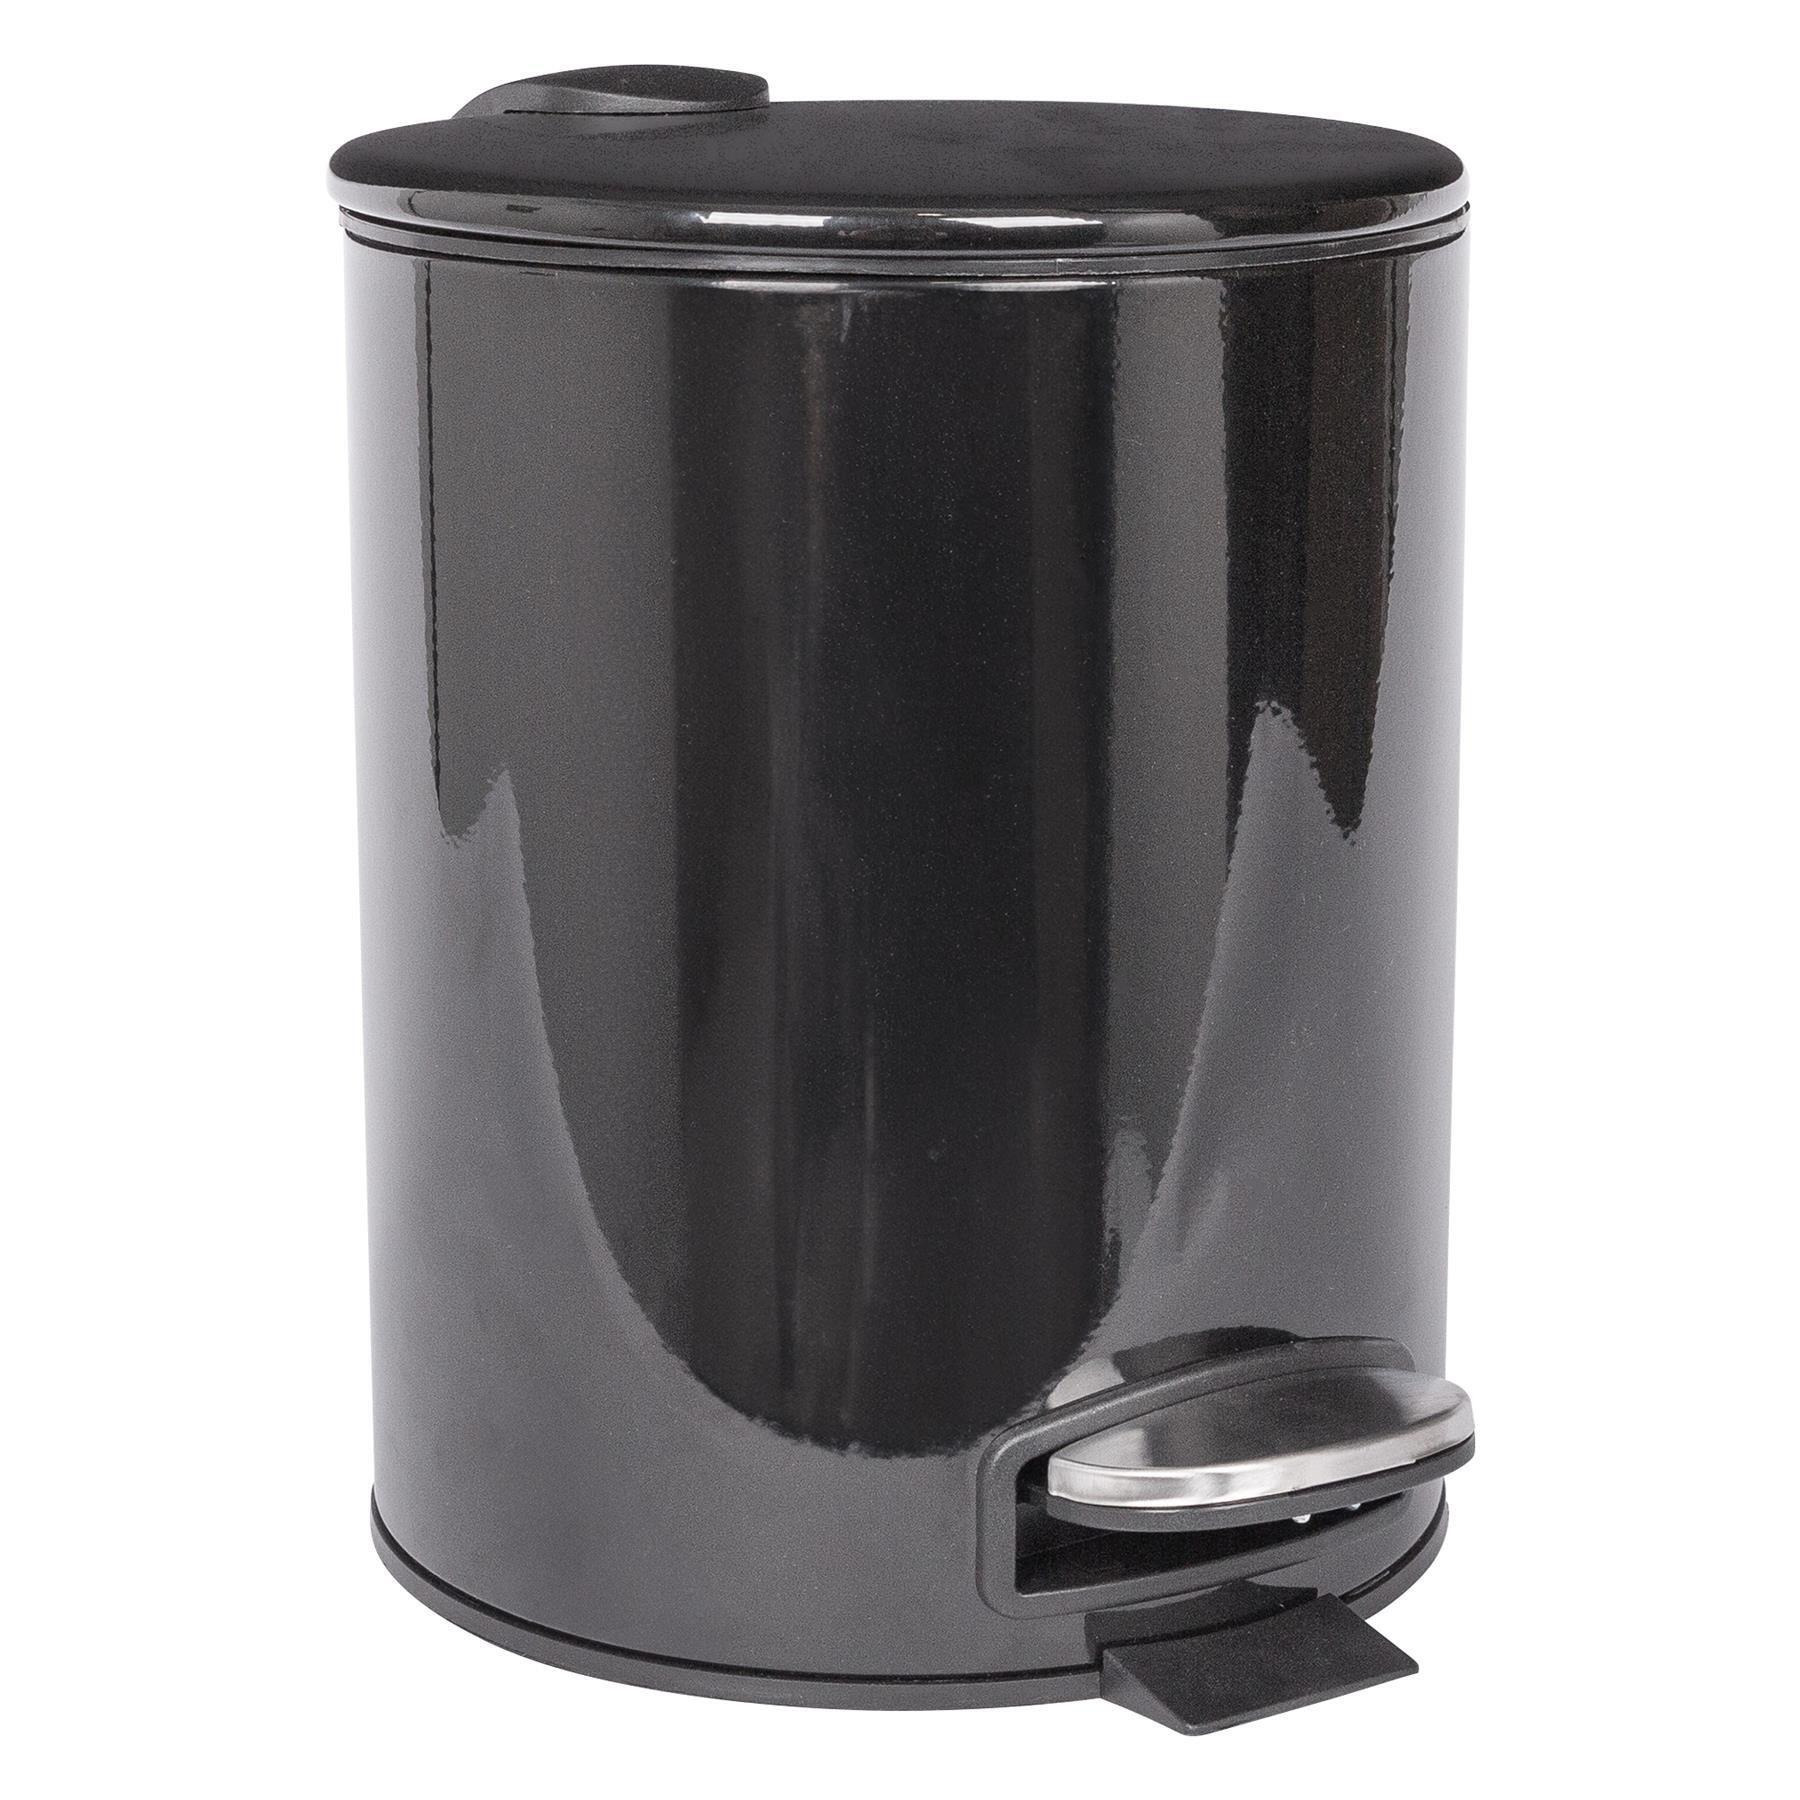 Round Stainless Steel Pedal Bin - 5L - Black - image 1